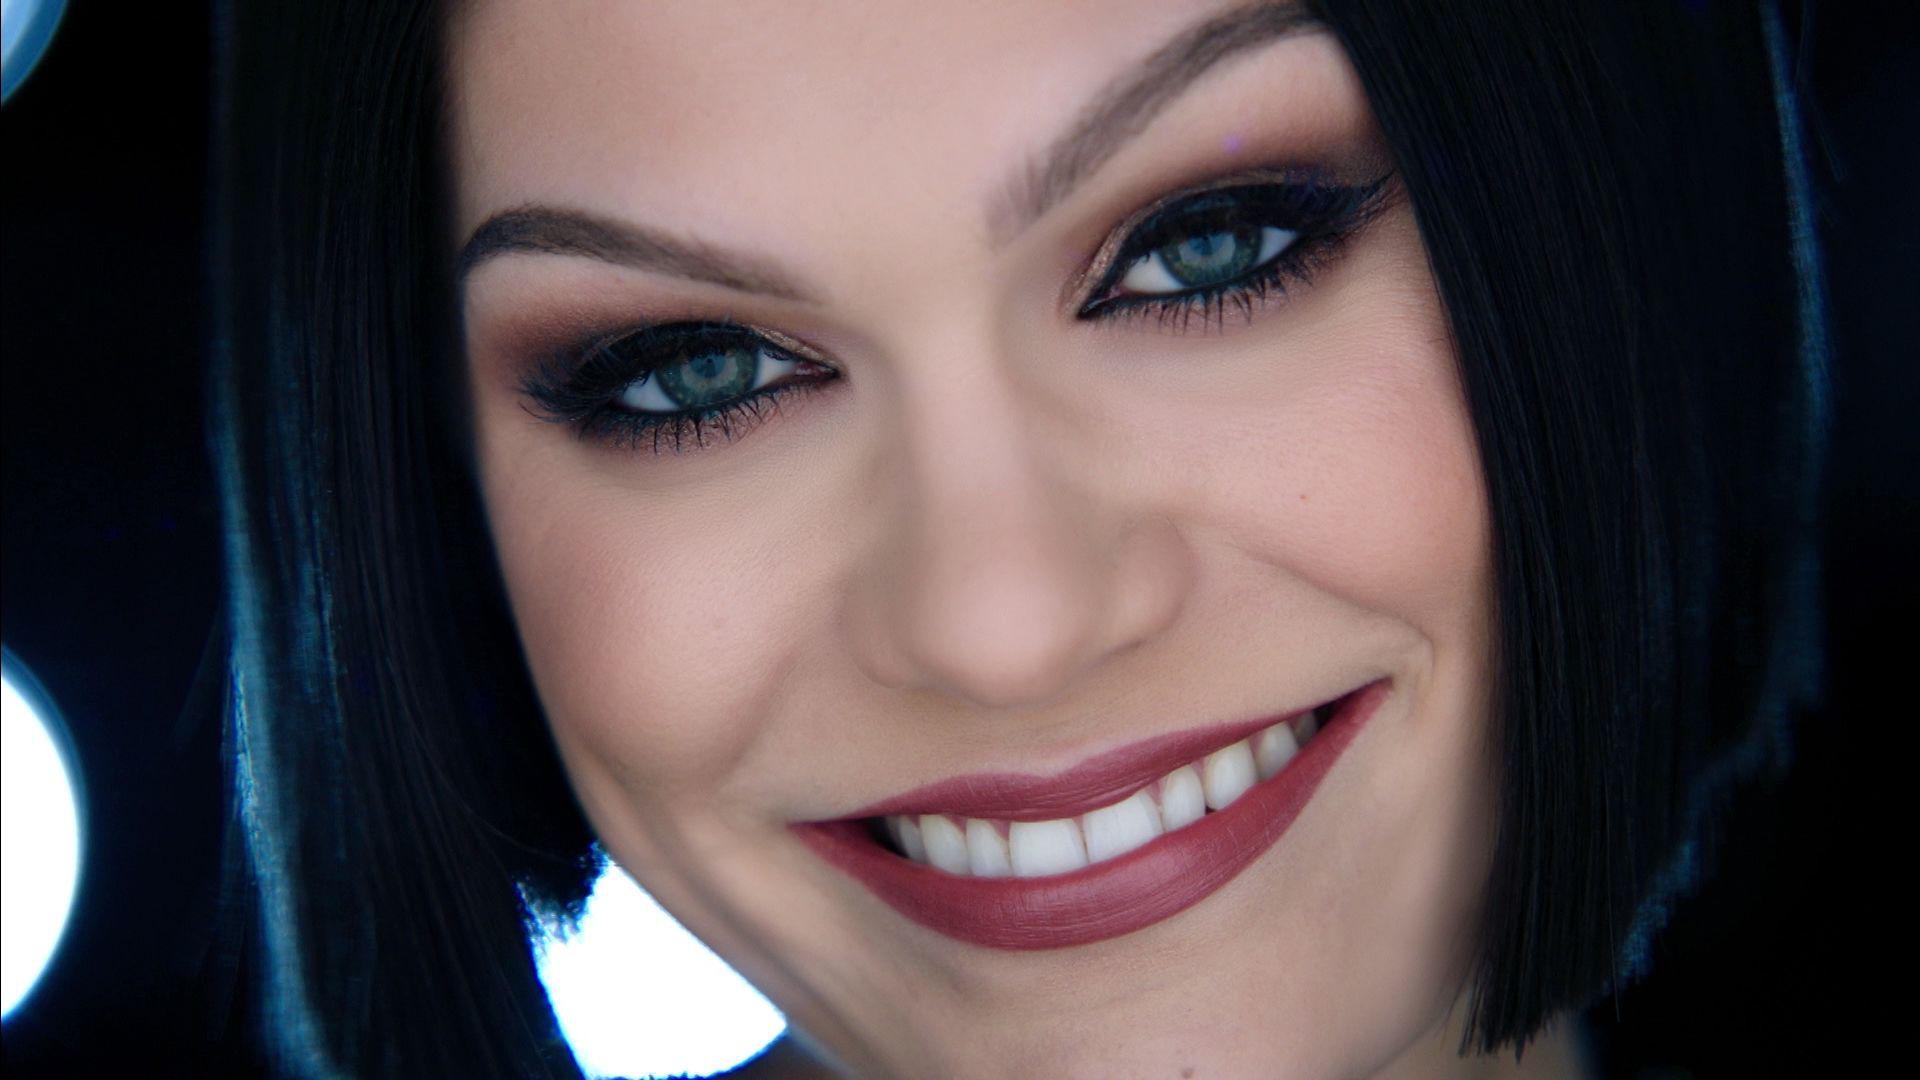 Flashlight (From Pitch Perfect 2 Soundtrack) by Jessie J on Apple